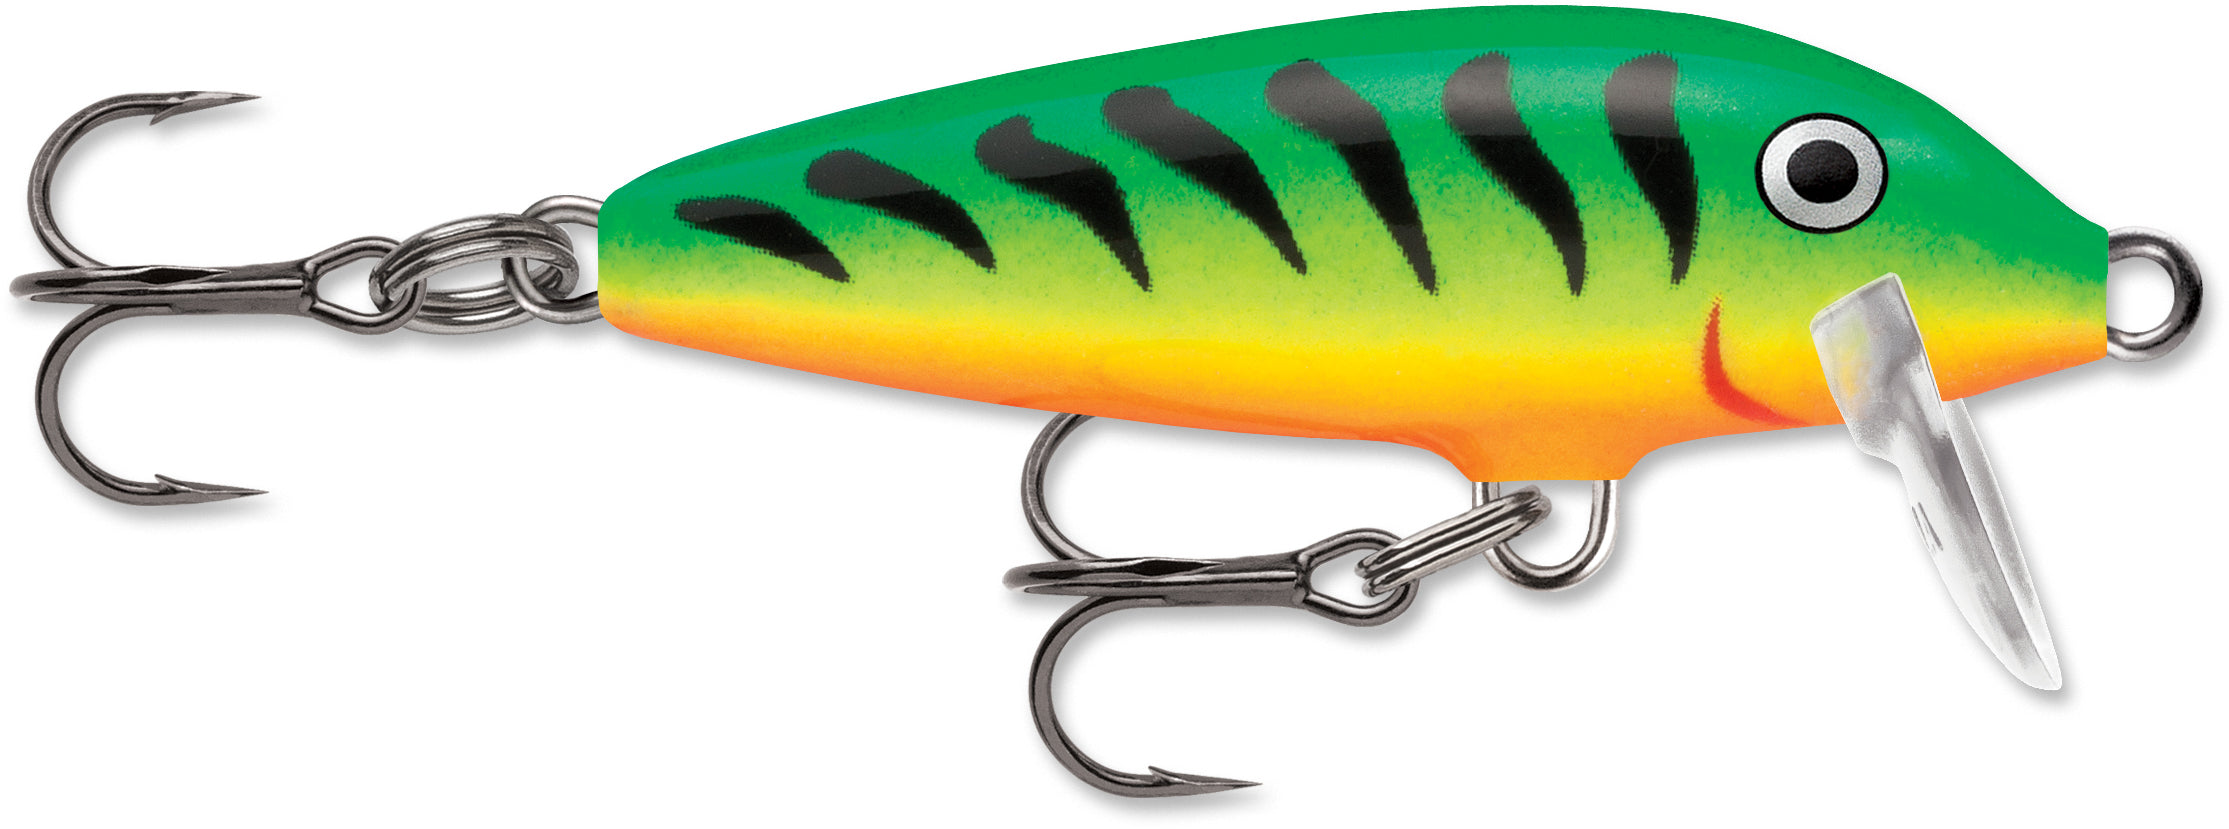 Rapala UV Lures: Are they supposed to glow? : r/Fishing_Gear